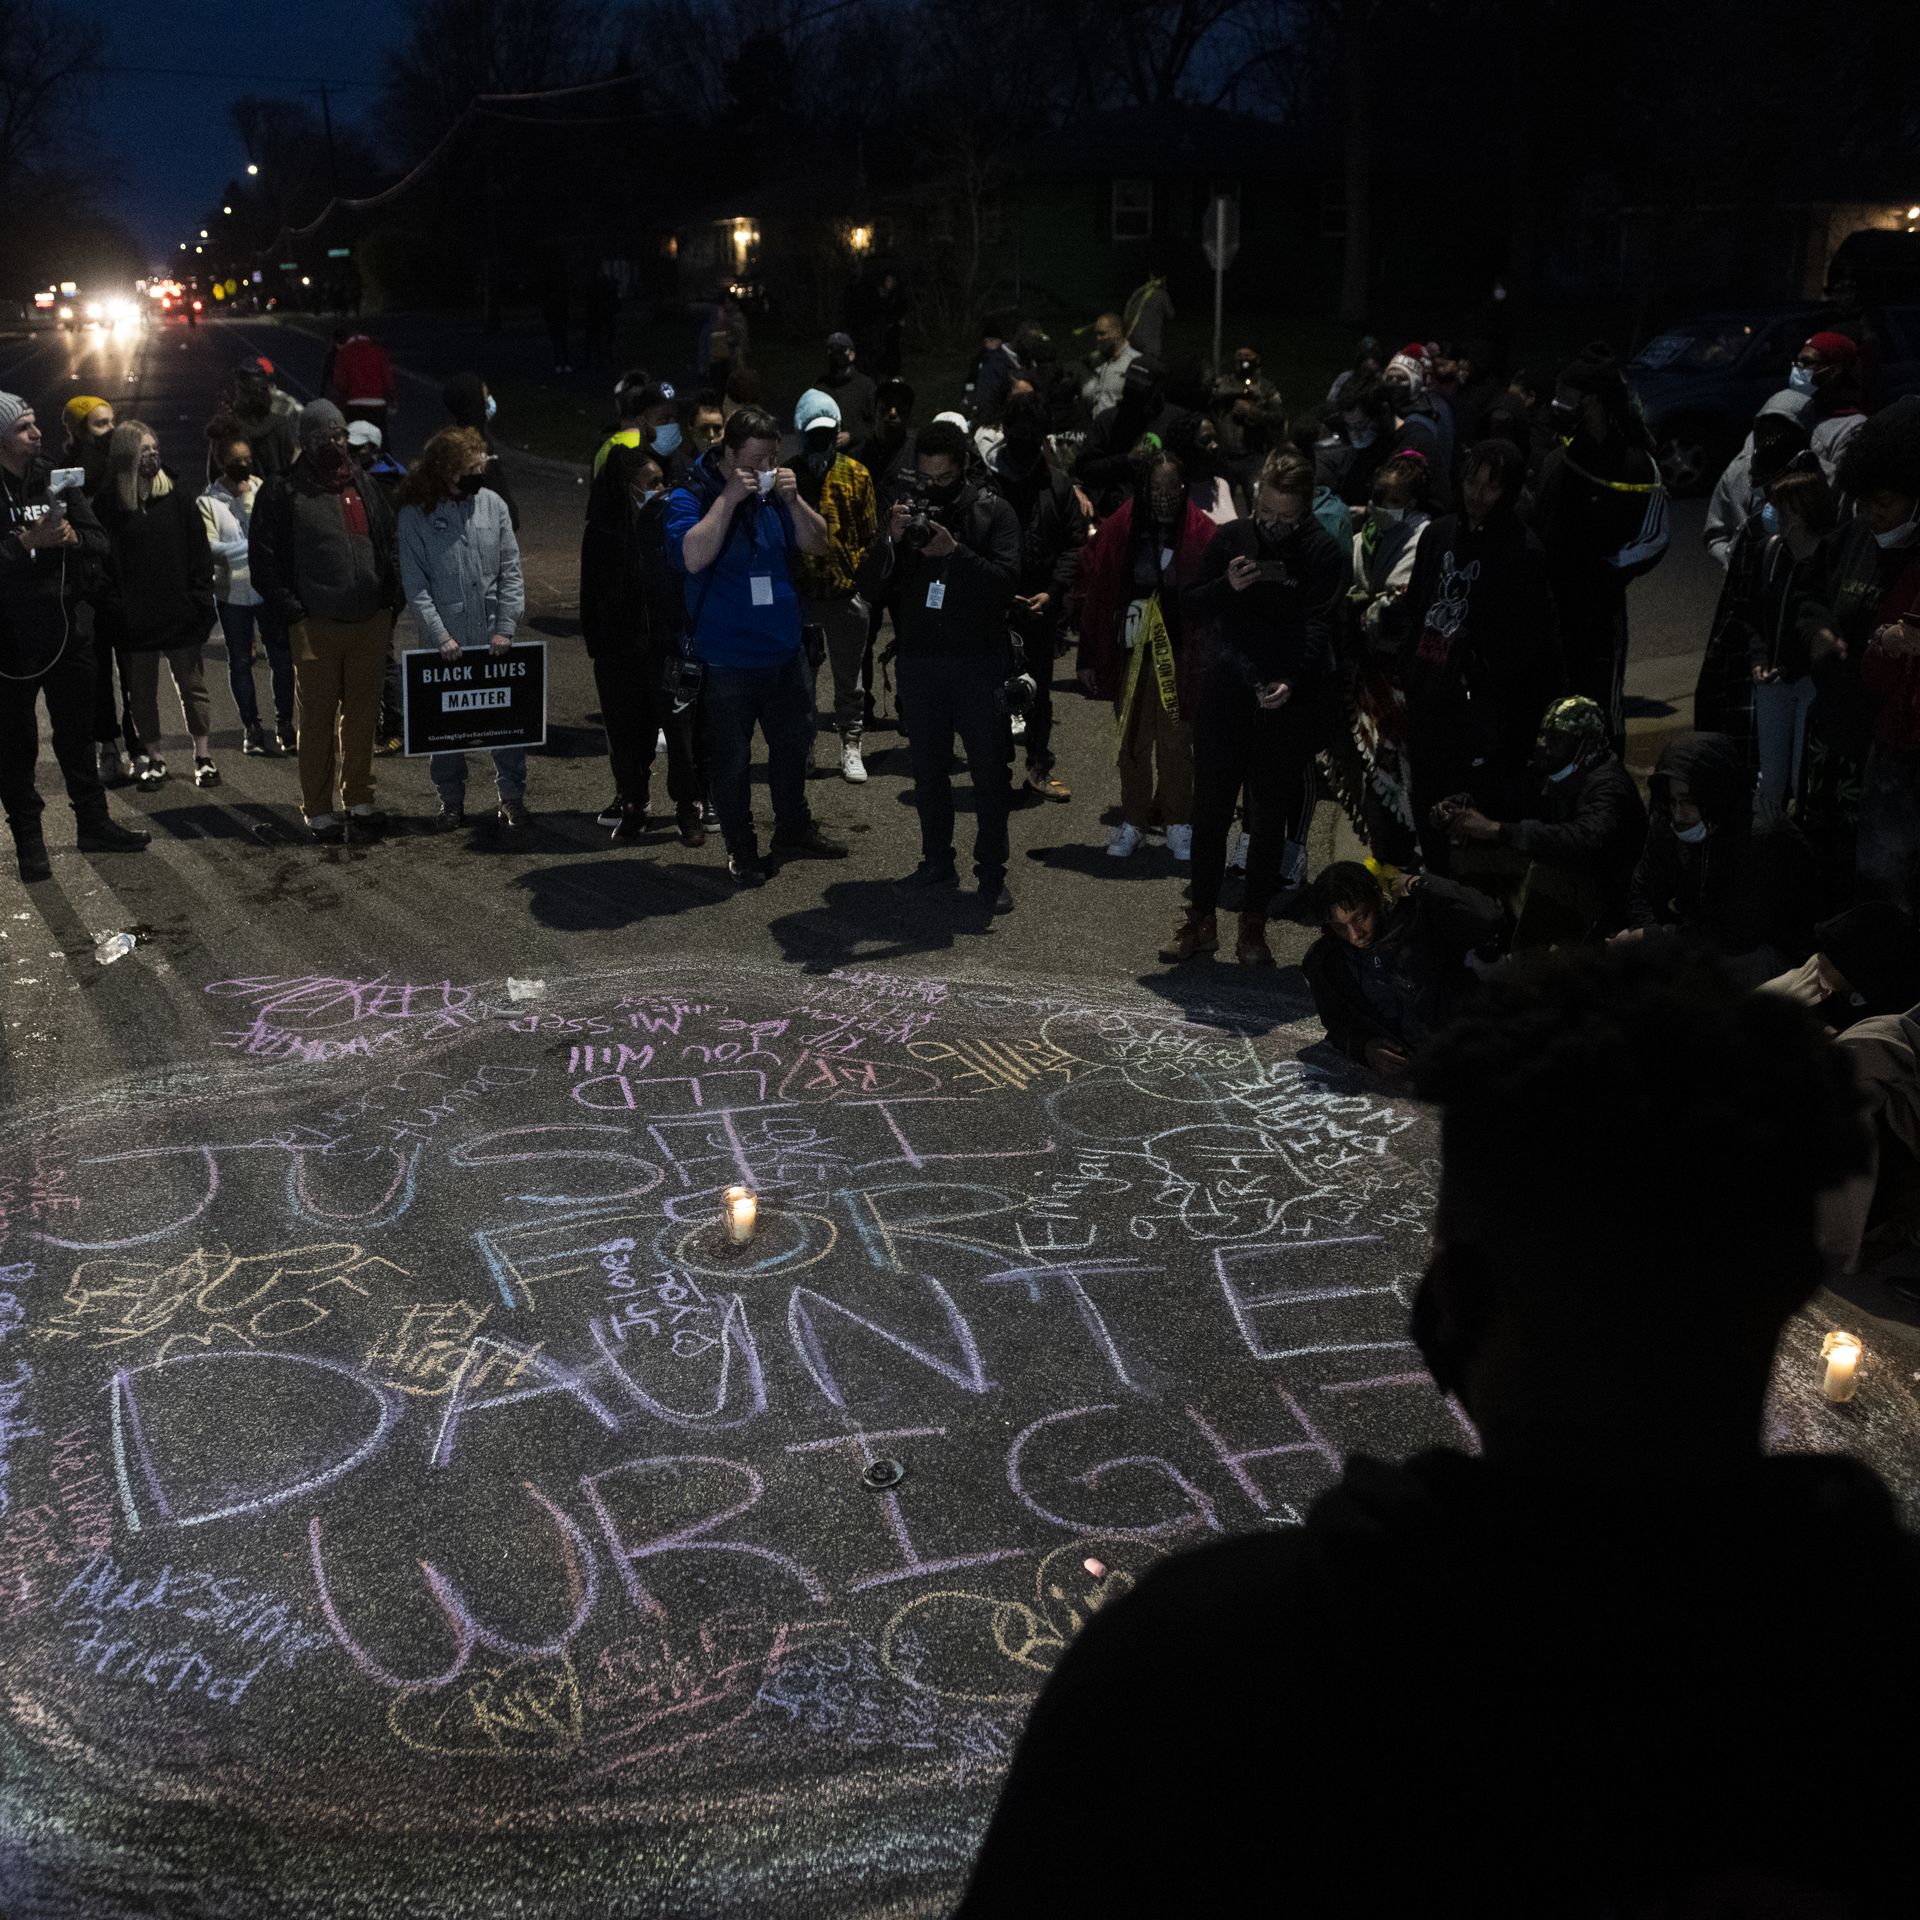 Protesters create a chalk circle that reads "Justice for Daunte Wright" in the street on April 11, 2021 in Brooklyn Center, Minnesota.